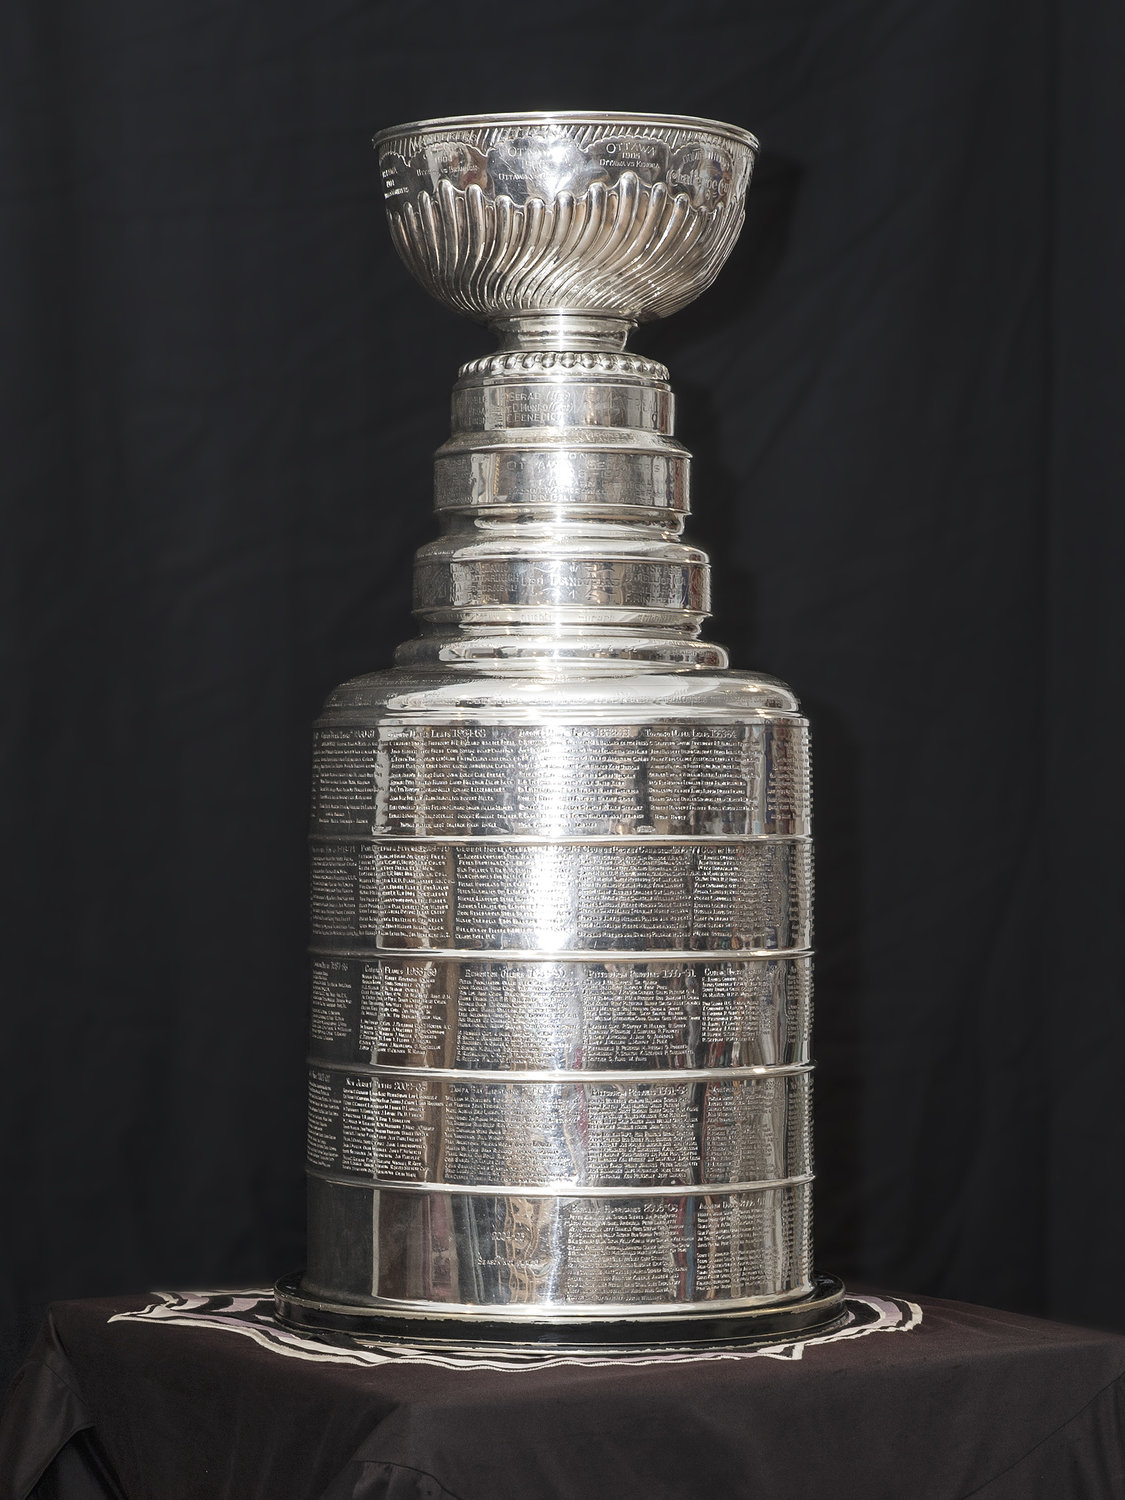 A couple of businesses will host the Stanley Cup on Oct. 10.